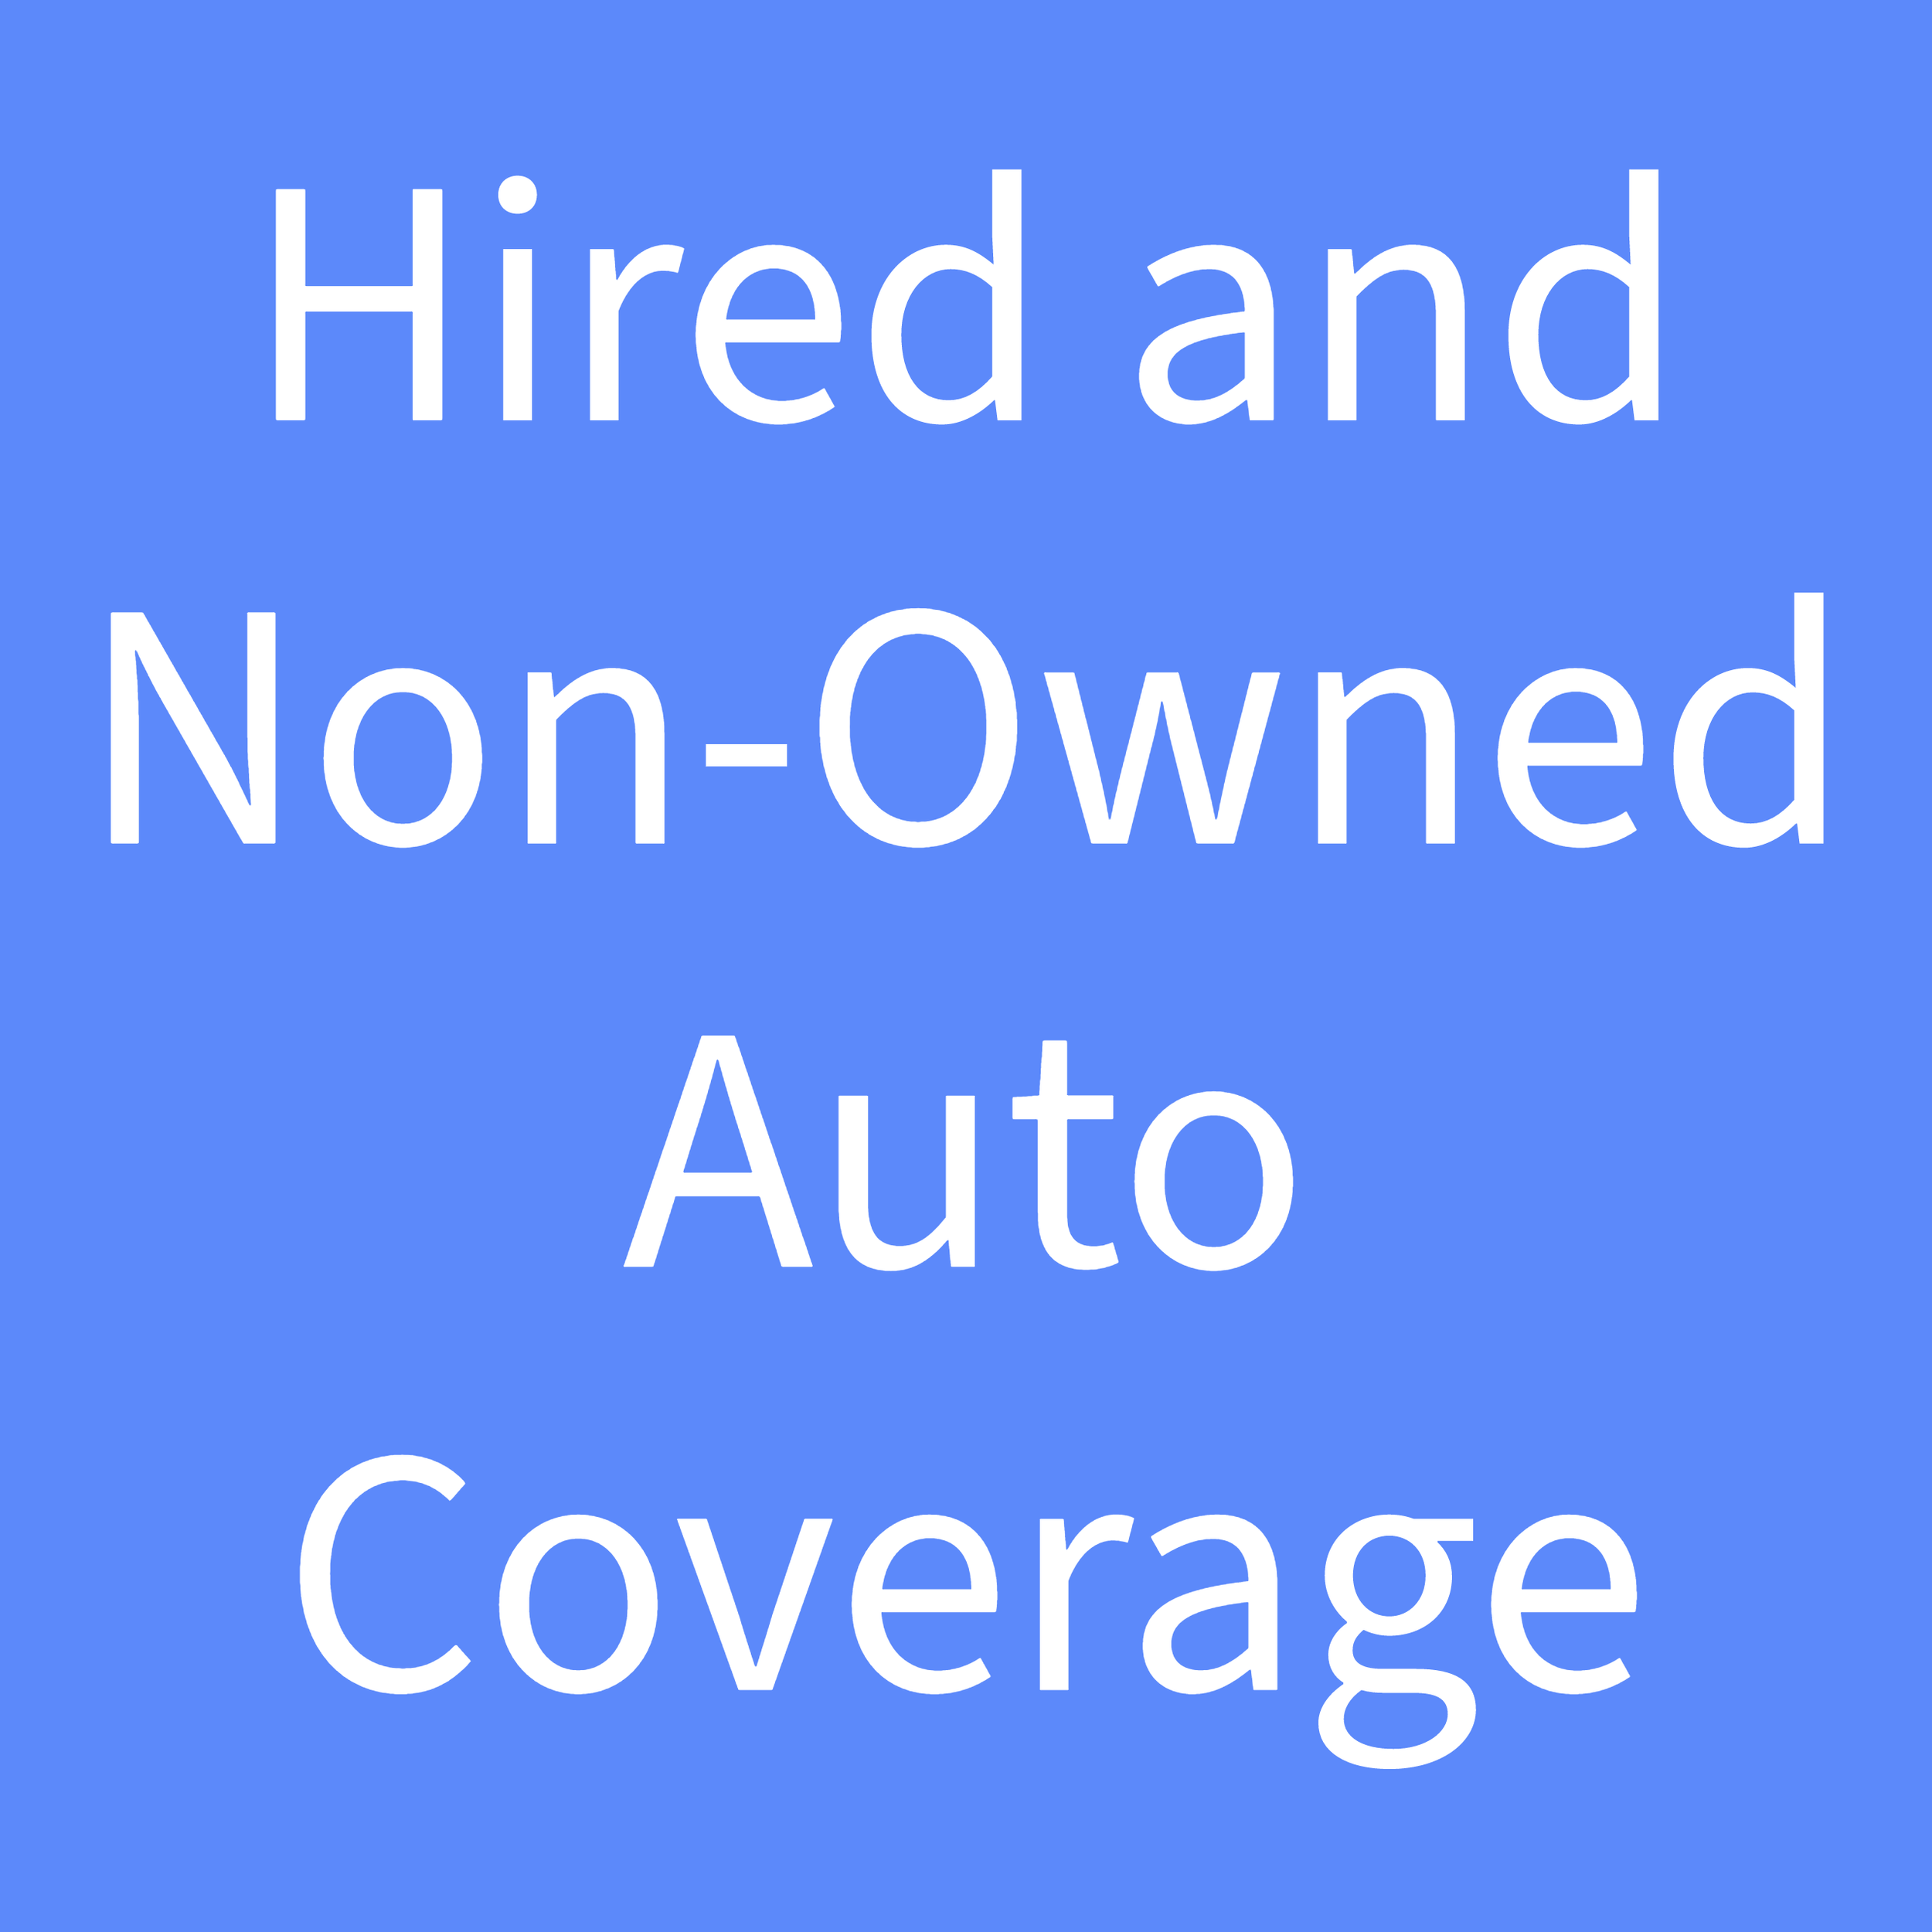 Hired and Non- Owned Auto Coverage